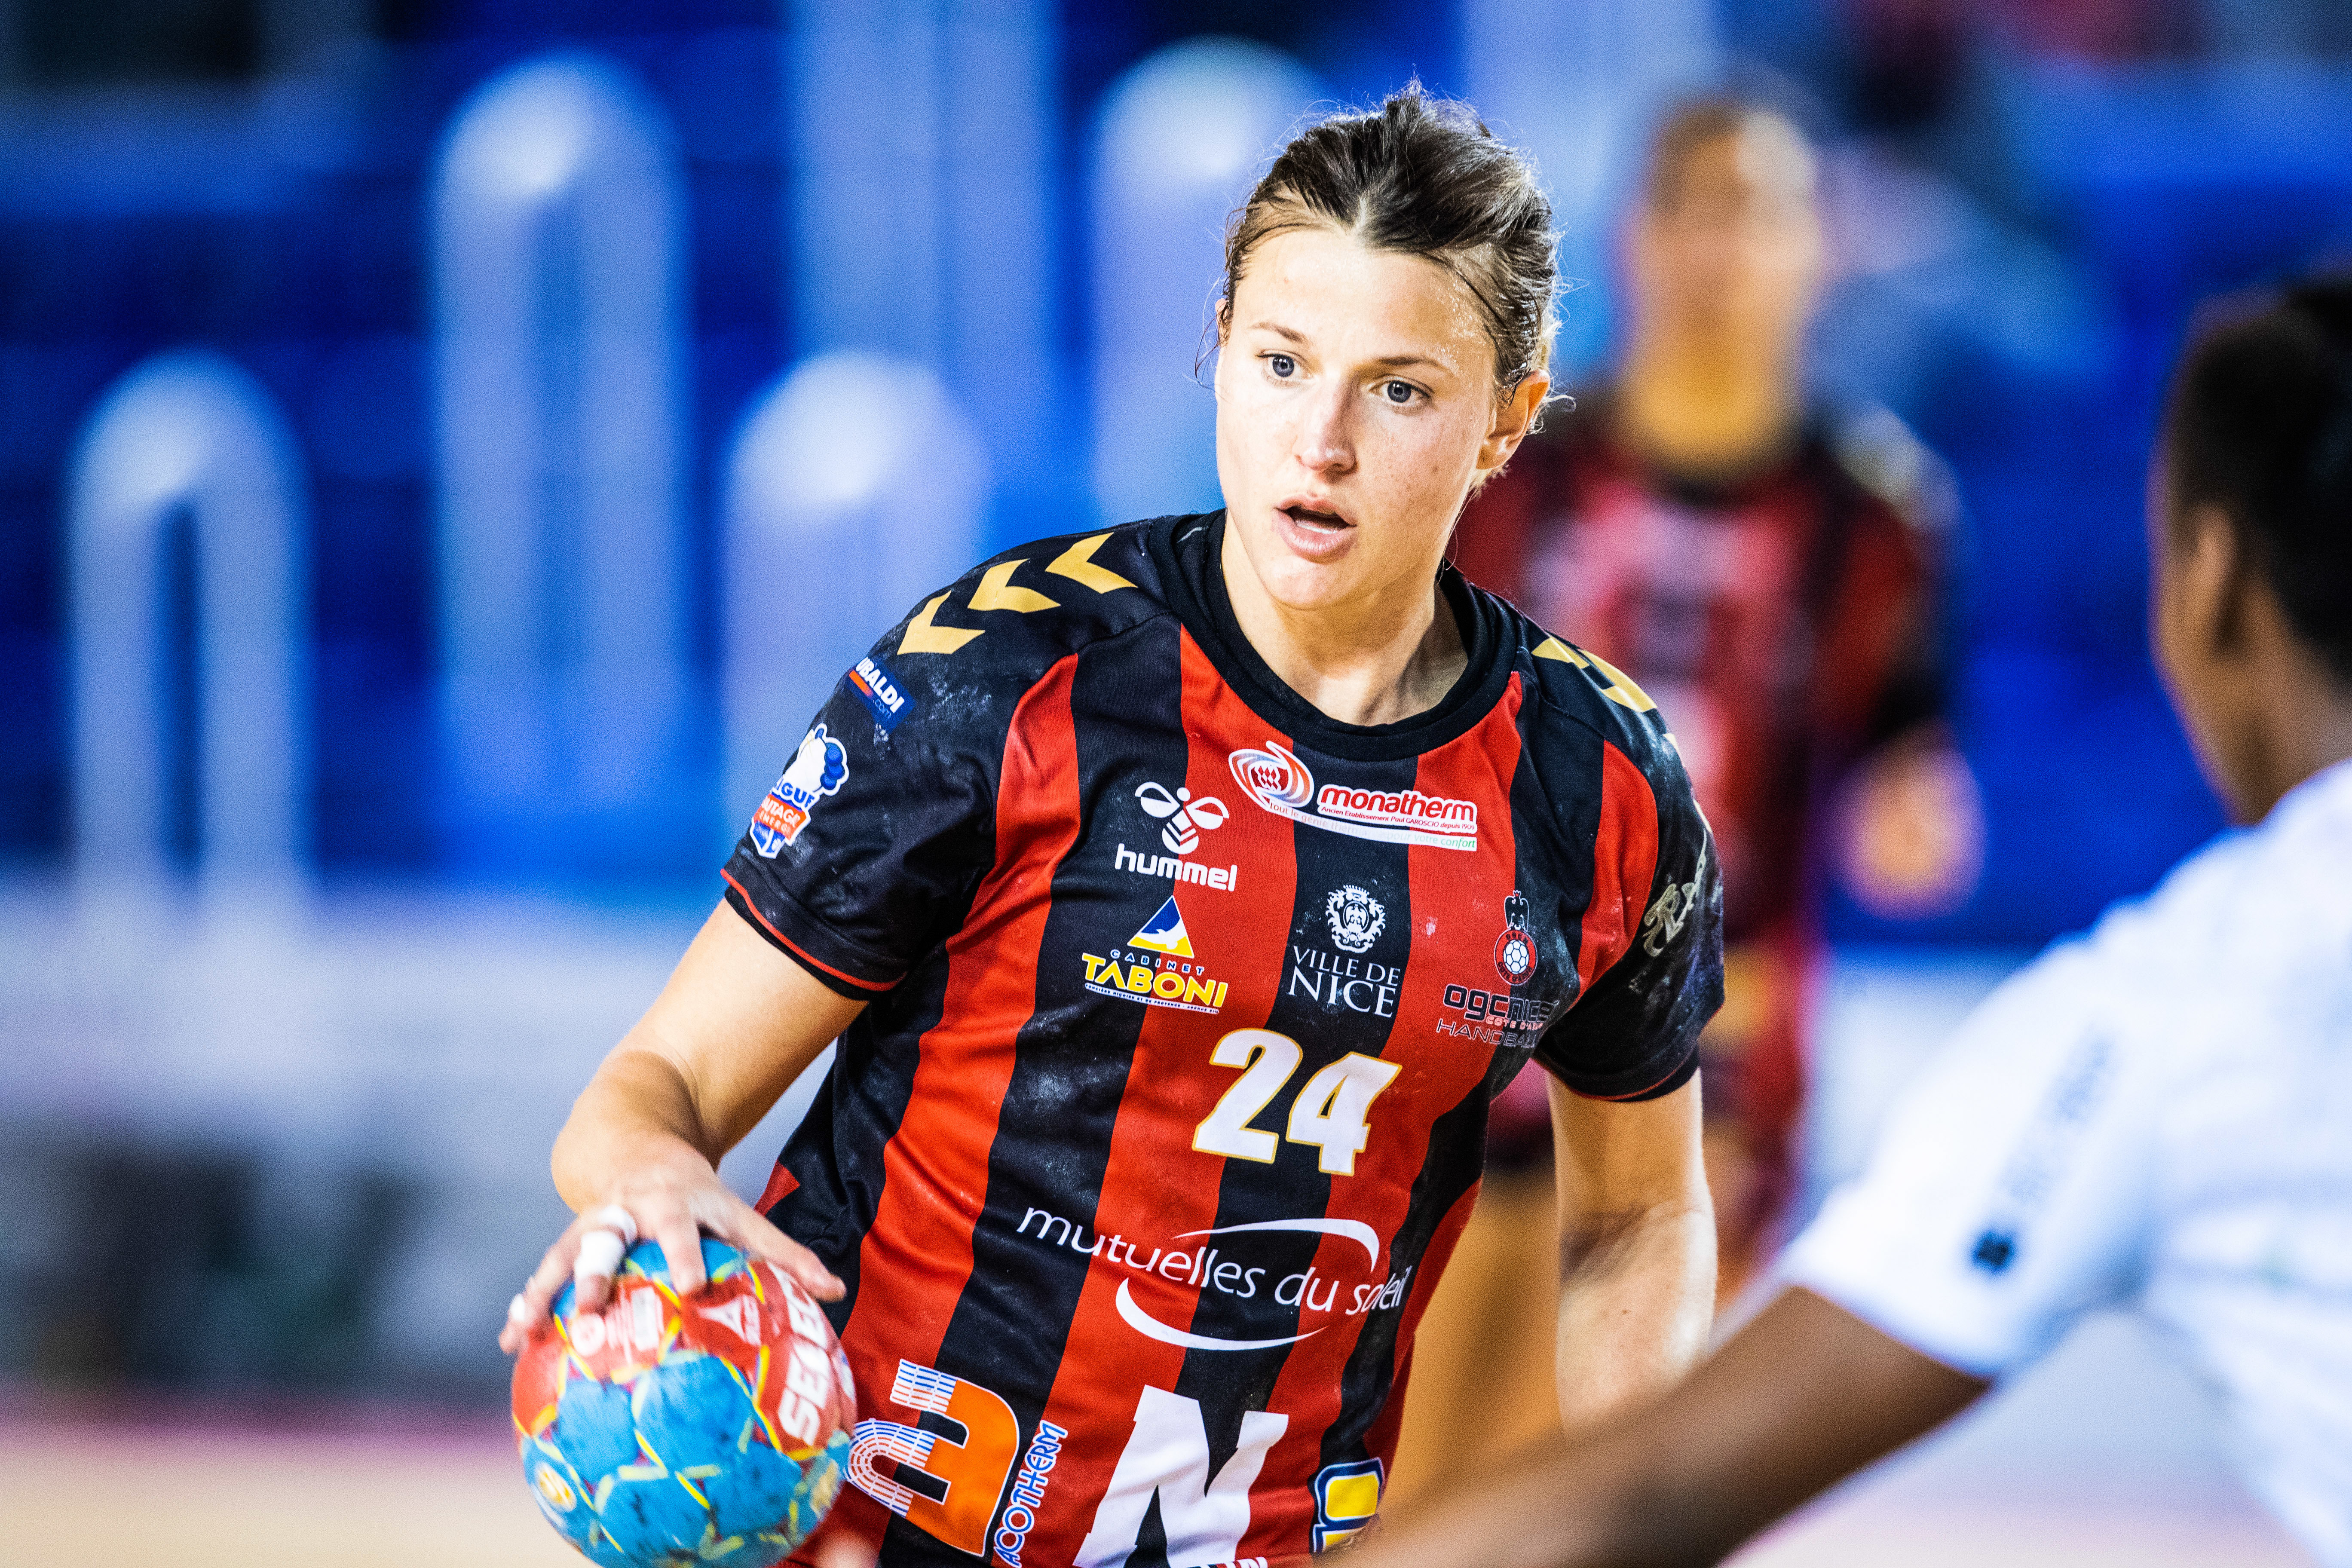 Noemie LACHAUD of OGC Nice during the Ligue Butaguaz Energie match between Nice and Paris 92 on April 3, 2021 in Nice, France. (Photo by Elliott Chouraqui/Icon Sport)